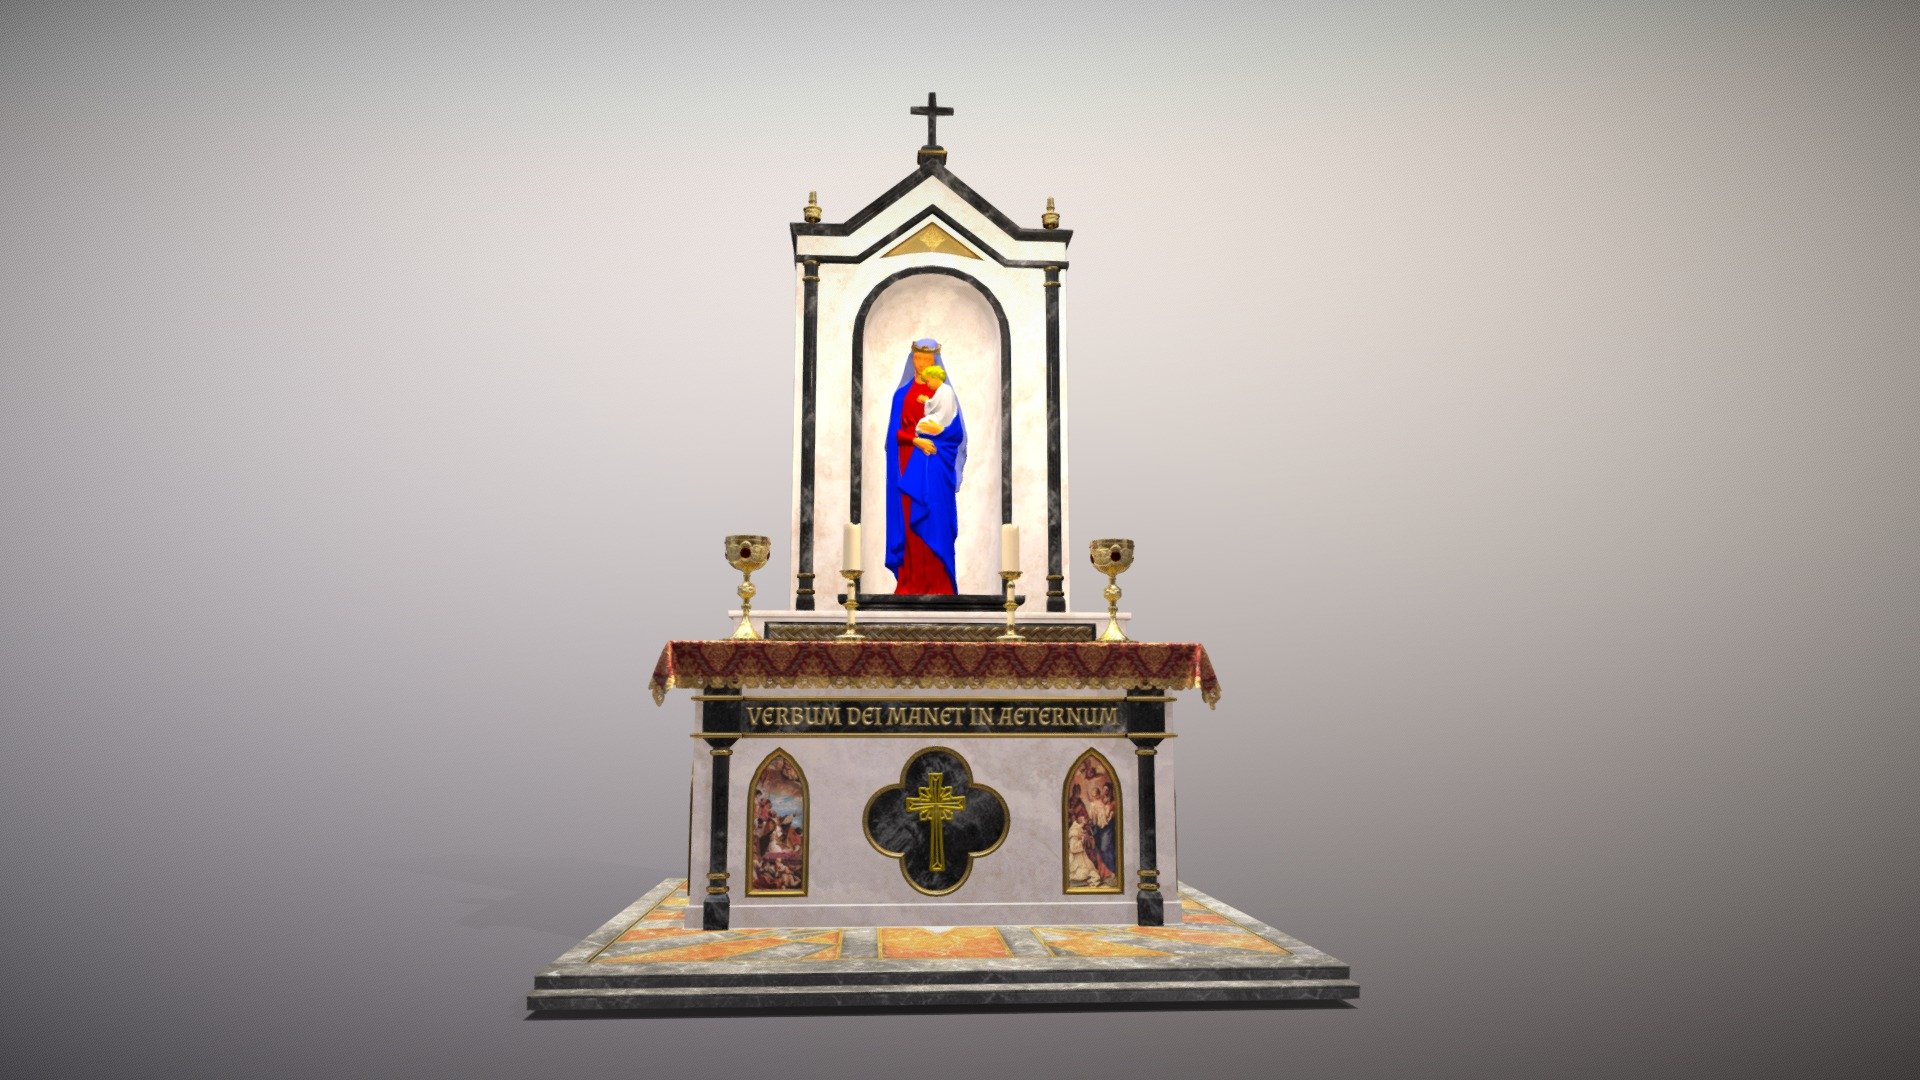 Altar with a wooden statue of the Madonna and Child with decorative paintings. The scene includes a gold decorative candlestick and a goblet with a large ruby. The altar itself is covered with an embroidered tablecloth with a Victorian pattern decorated with lace on the sides. On the front of the altar you will find the golden text &ldquo;VERBUM DEI MANER IN AETERNUM